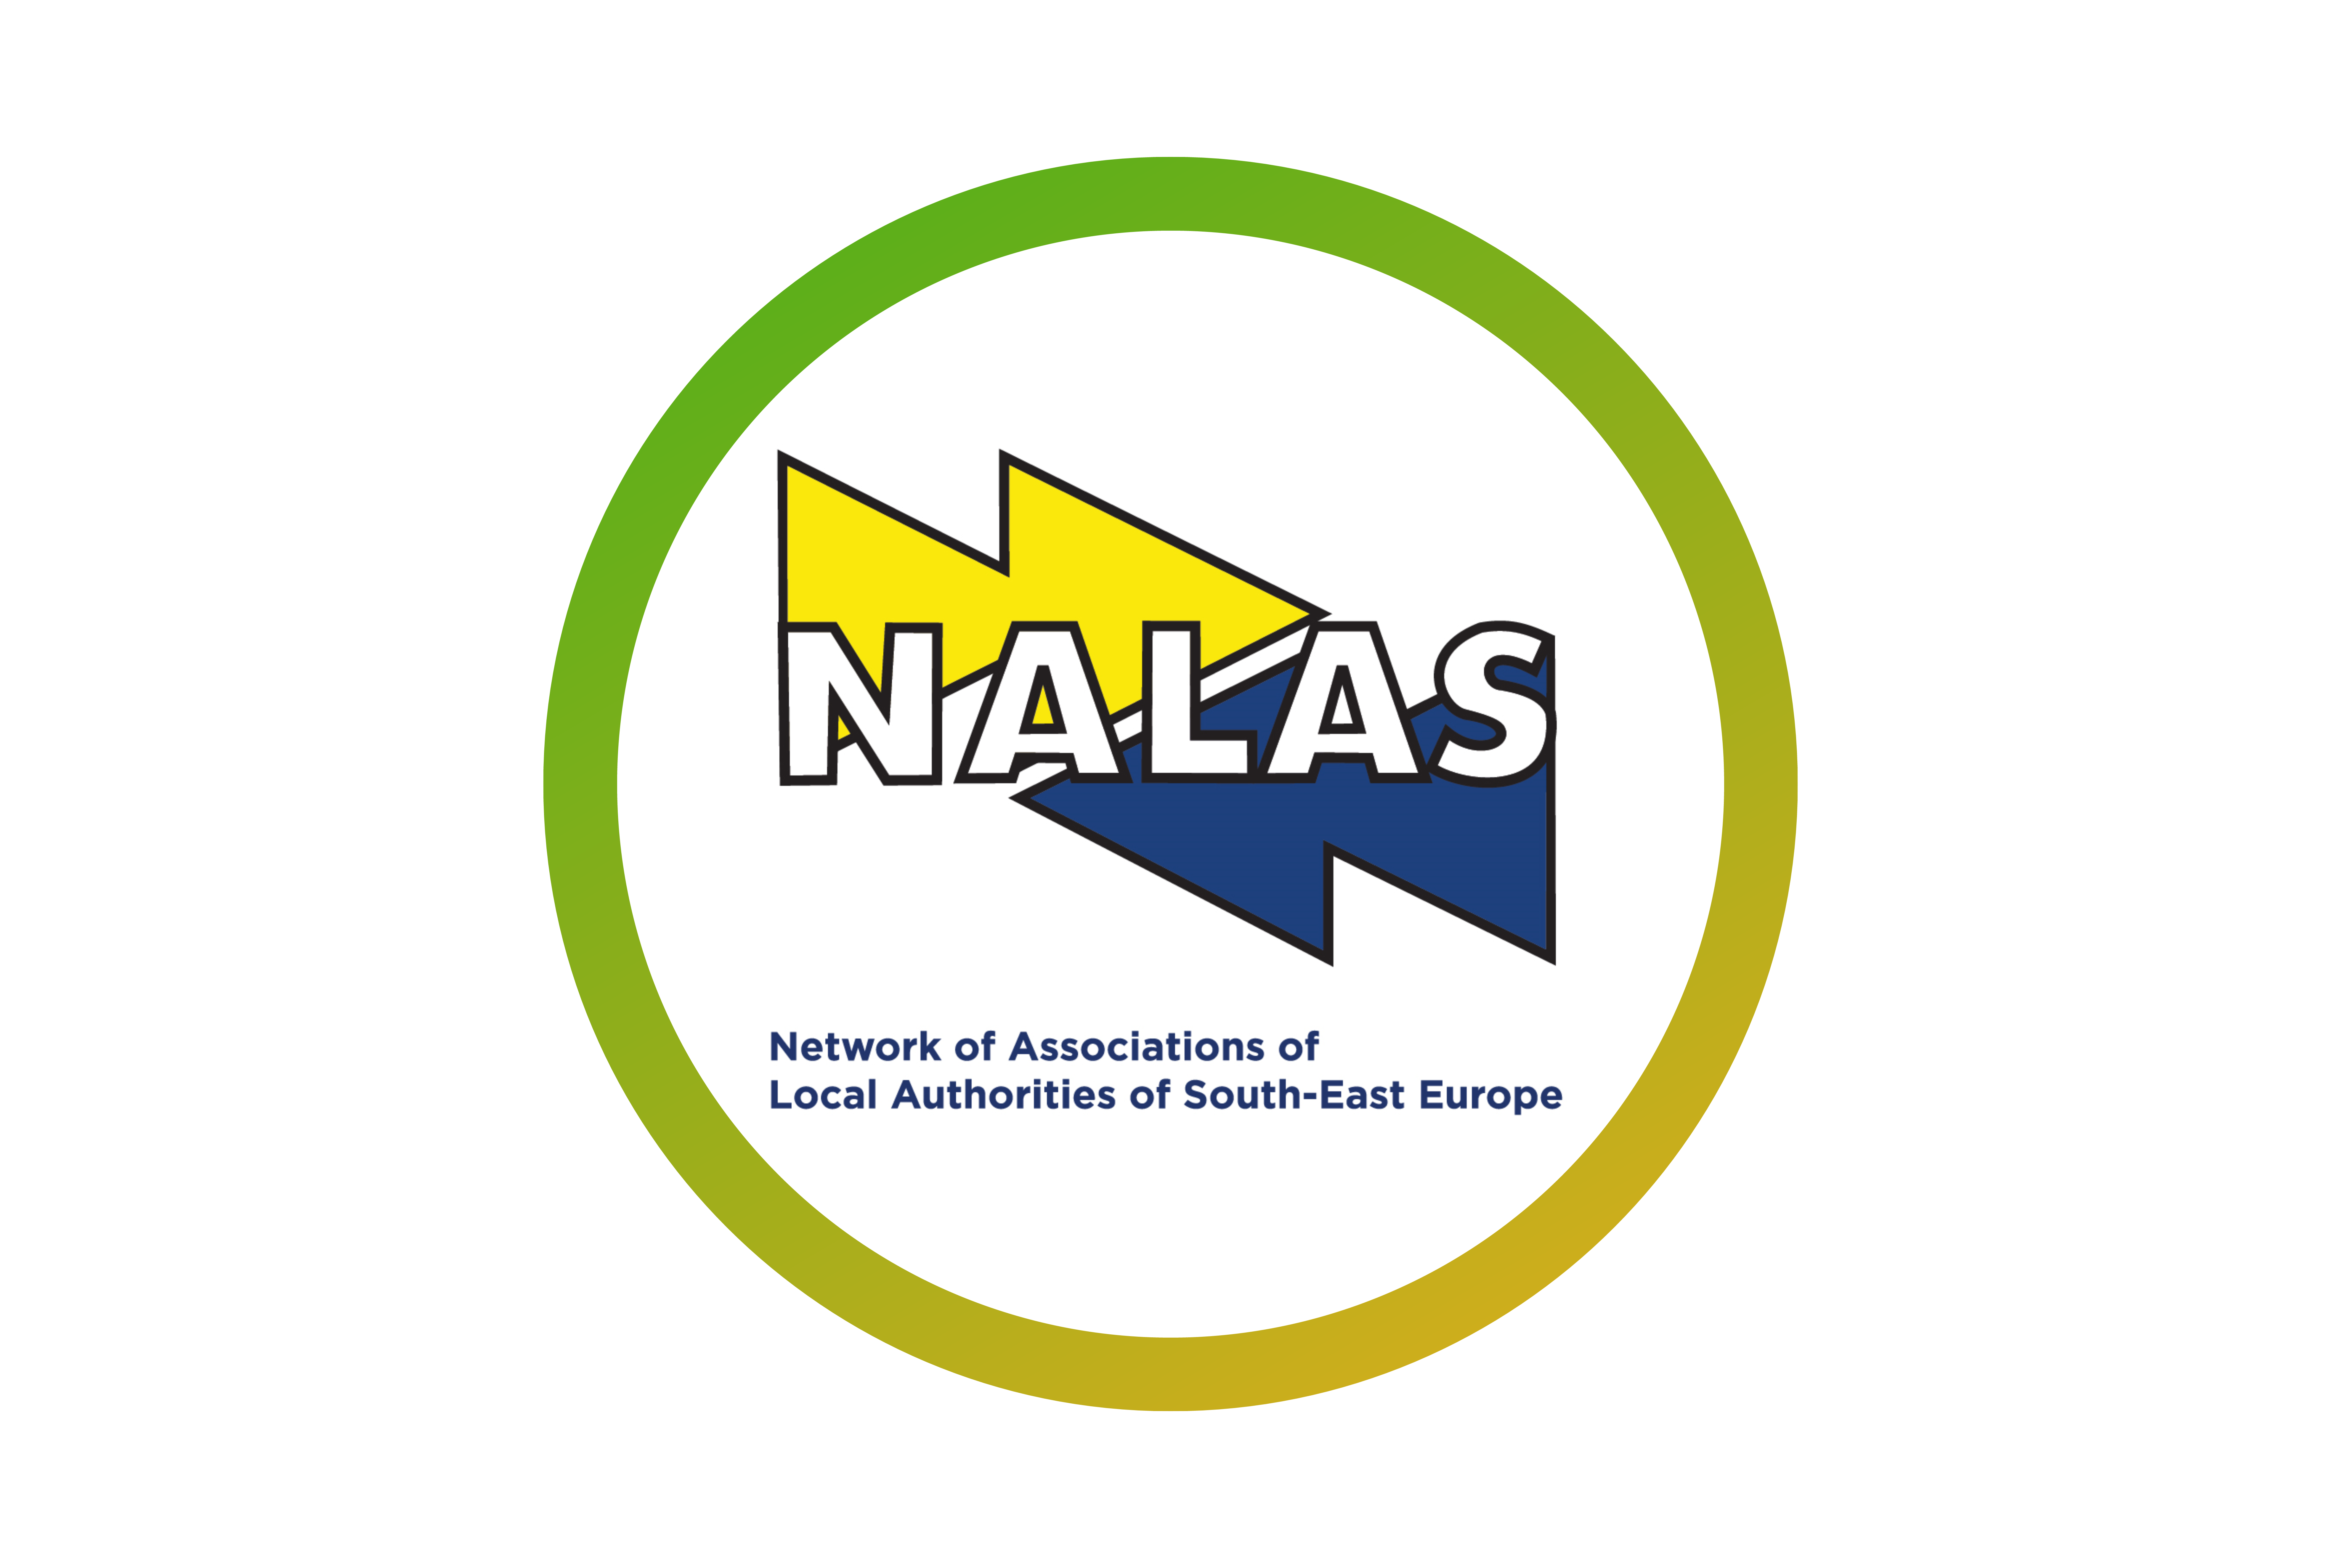 NALAS - Network of Associations of Local Authorities of South-East Europe